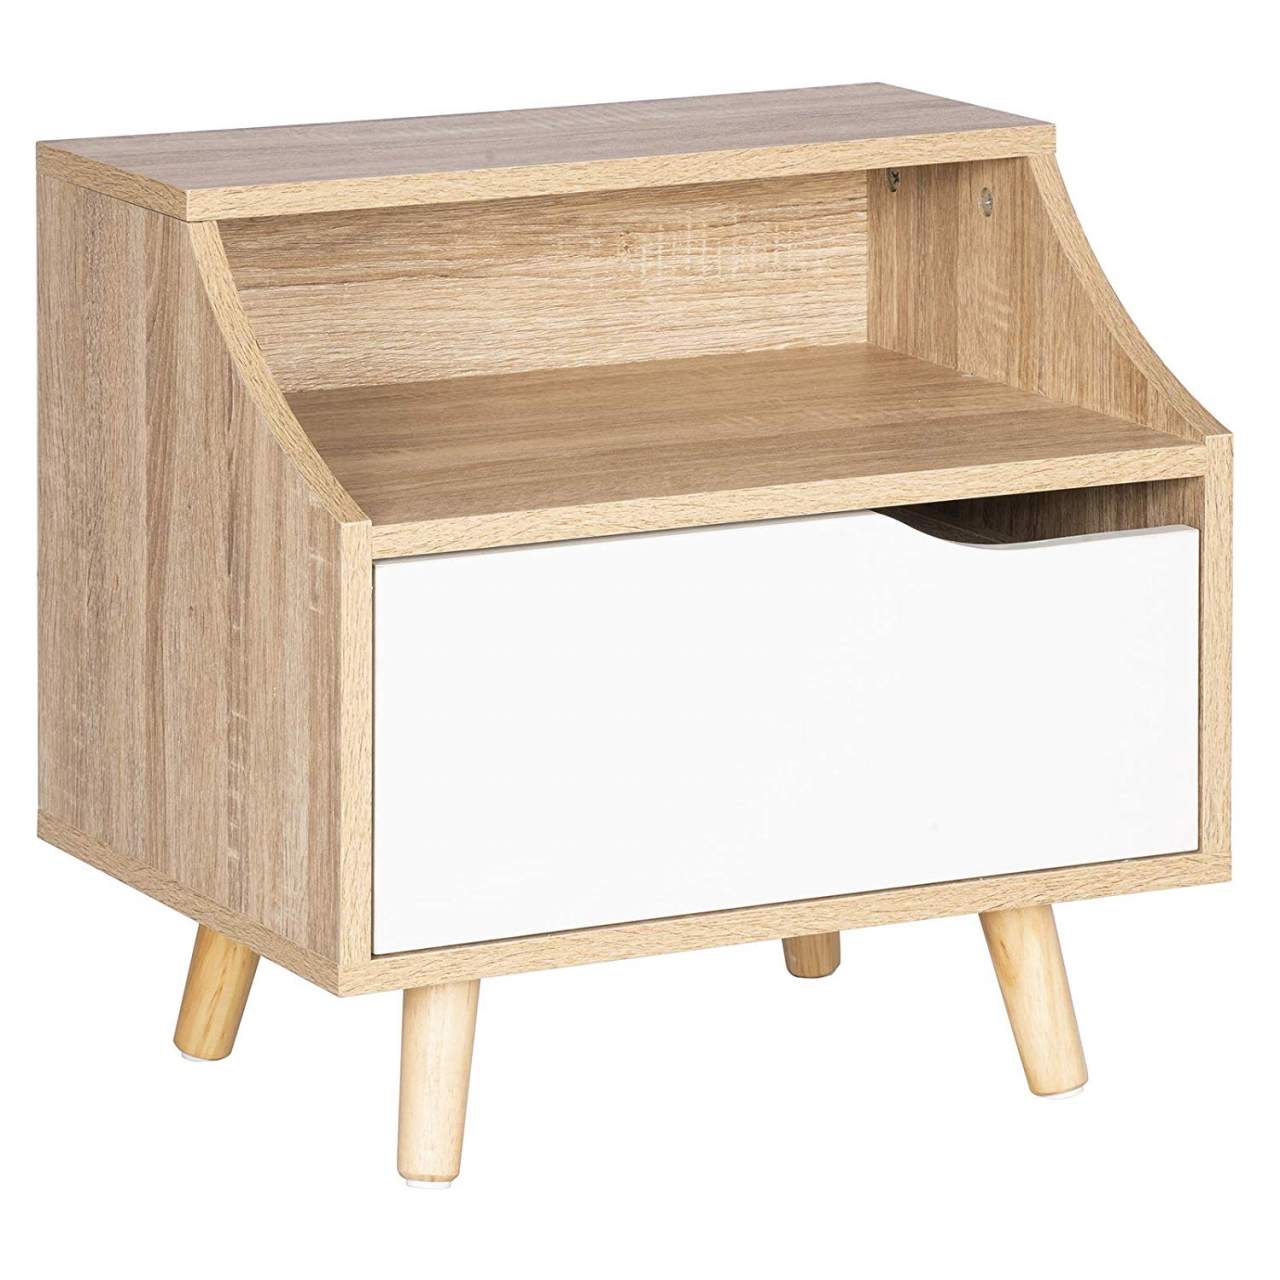 Bedside Table With A Drawer And An Open Compartment Light Oak